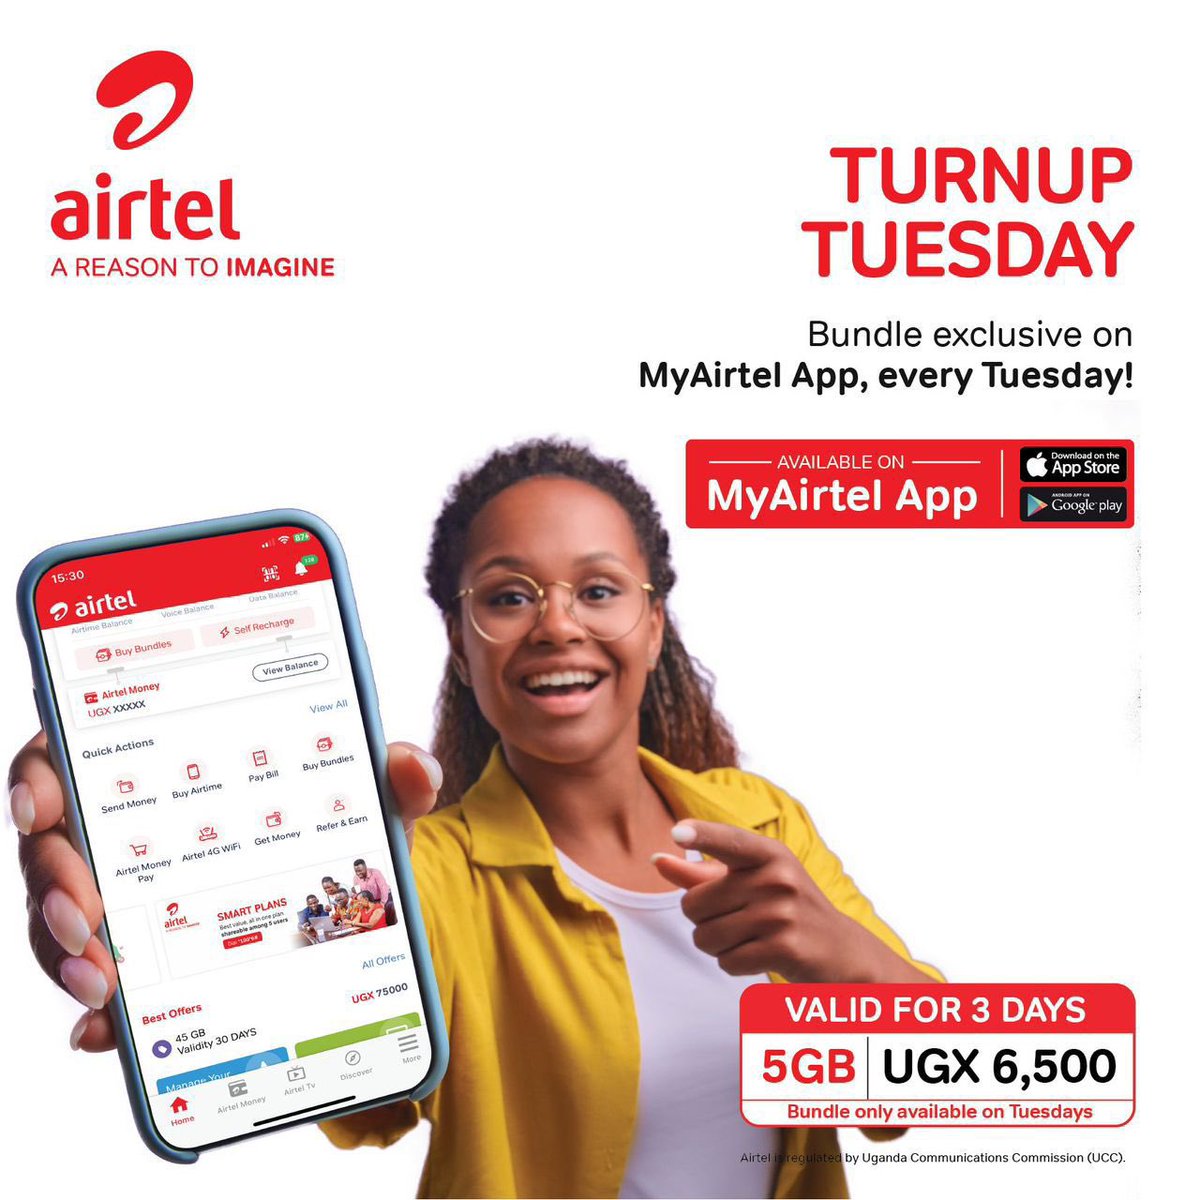 Hey people🔥 Dont forget to spice up your Tuesday with a #TurnUpTuesday bundle❕ Swiftly grab a 5gb at as low as 6500/ on the #MyAirtelApp to get started, kindly download the App here👇👇 airtelafrica.onelink.me/cGyr/qgj4qeu2